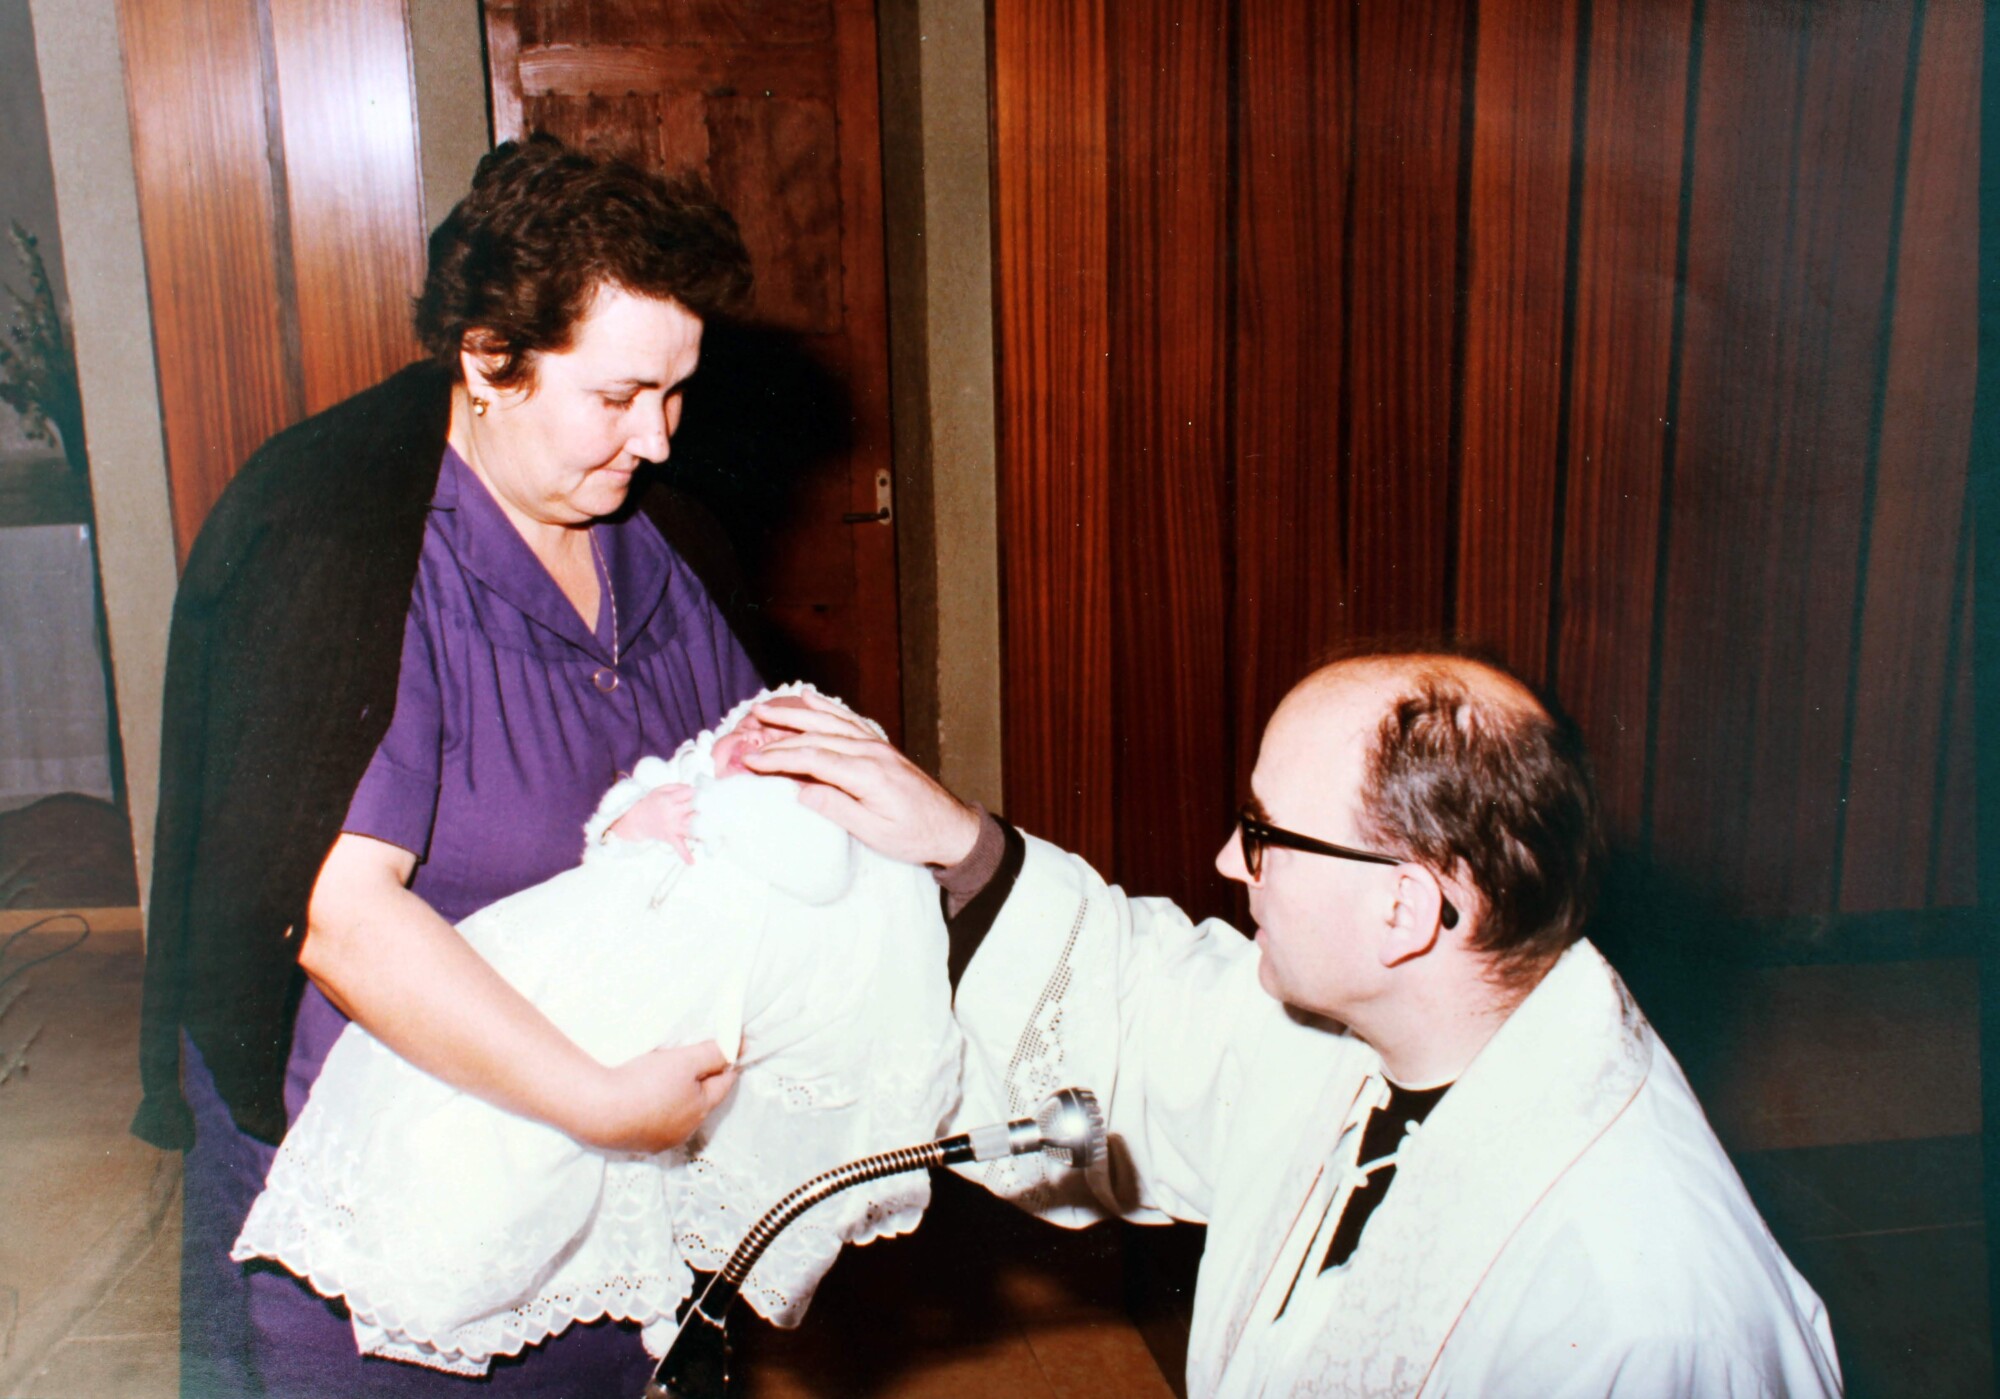 My grandmother in the baptism of her grandson with the Priest (Photo: Private)